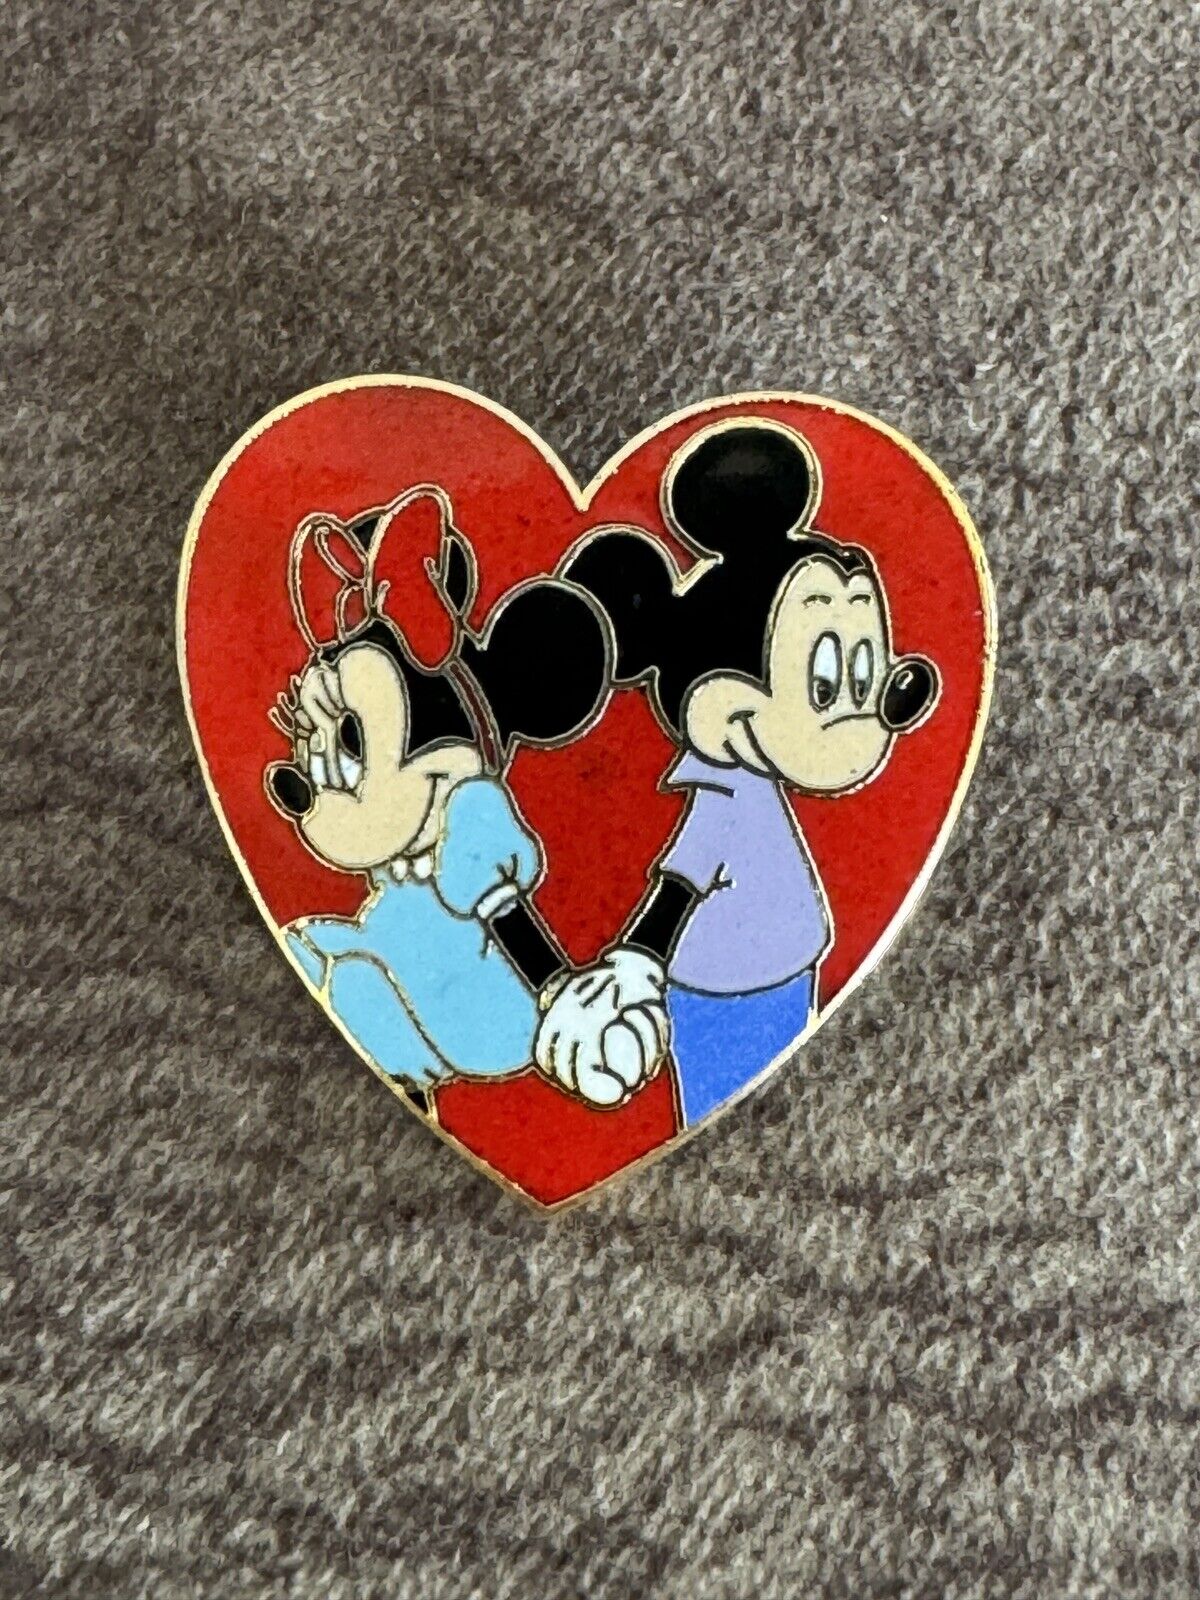 WDP Vintage Disney Pin Mickey & Minnie Red Heart Holding Hands AS IS